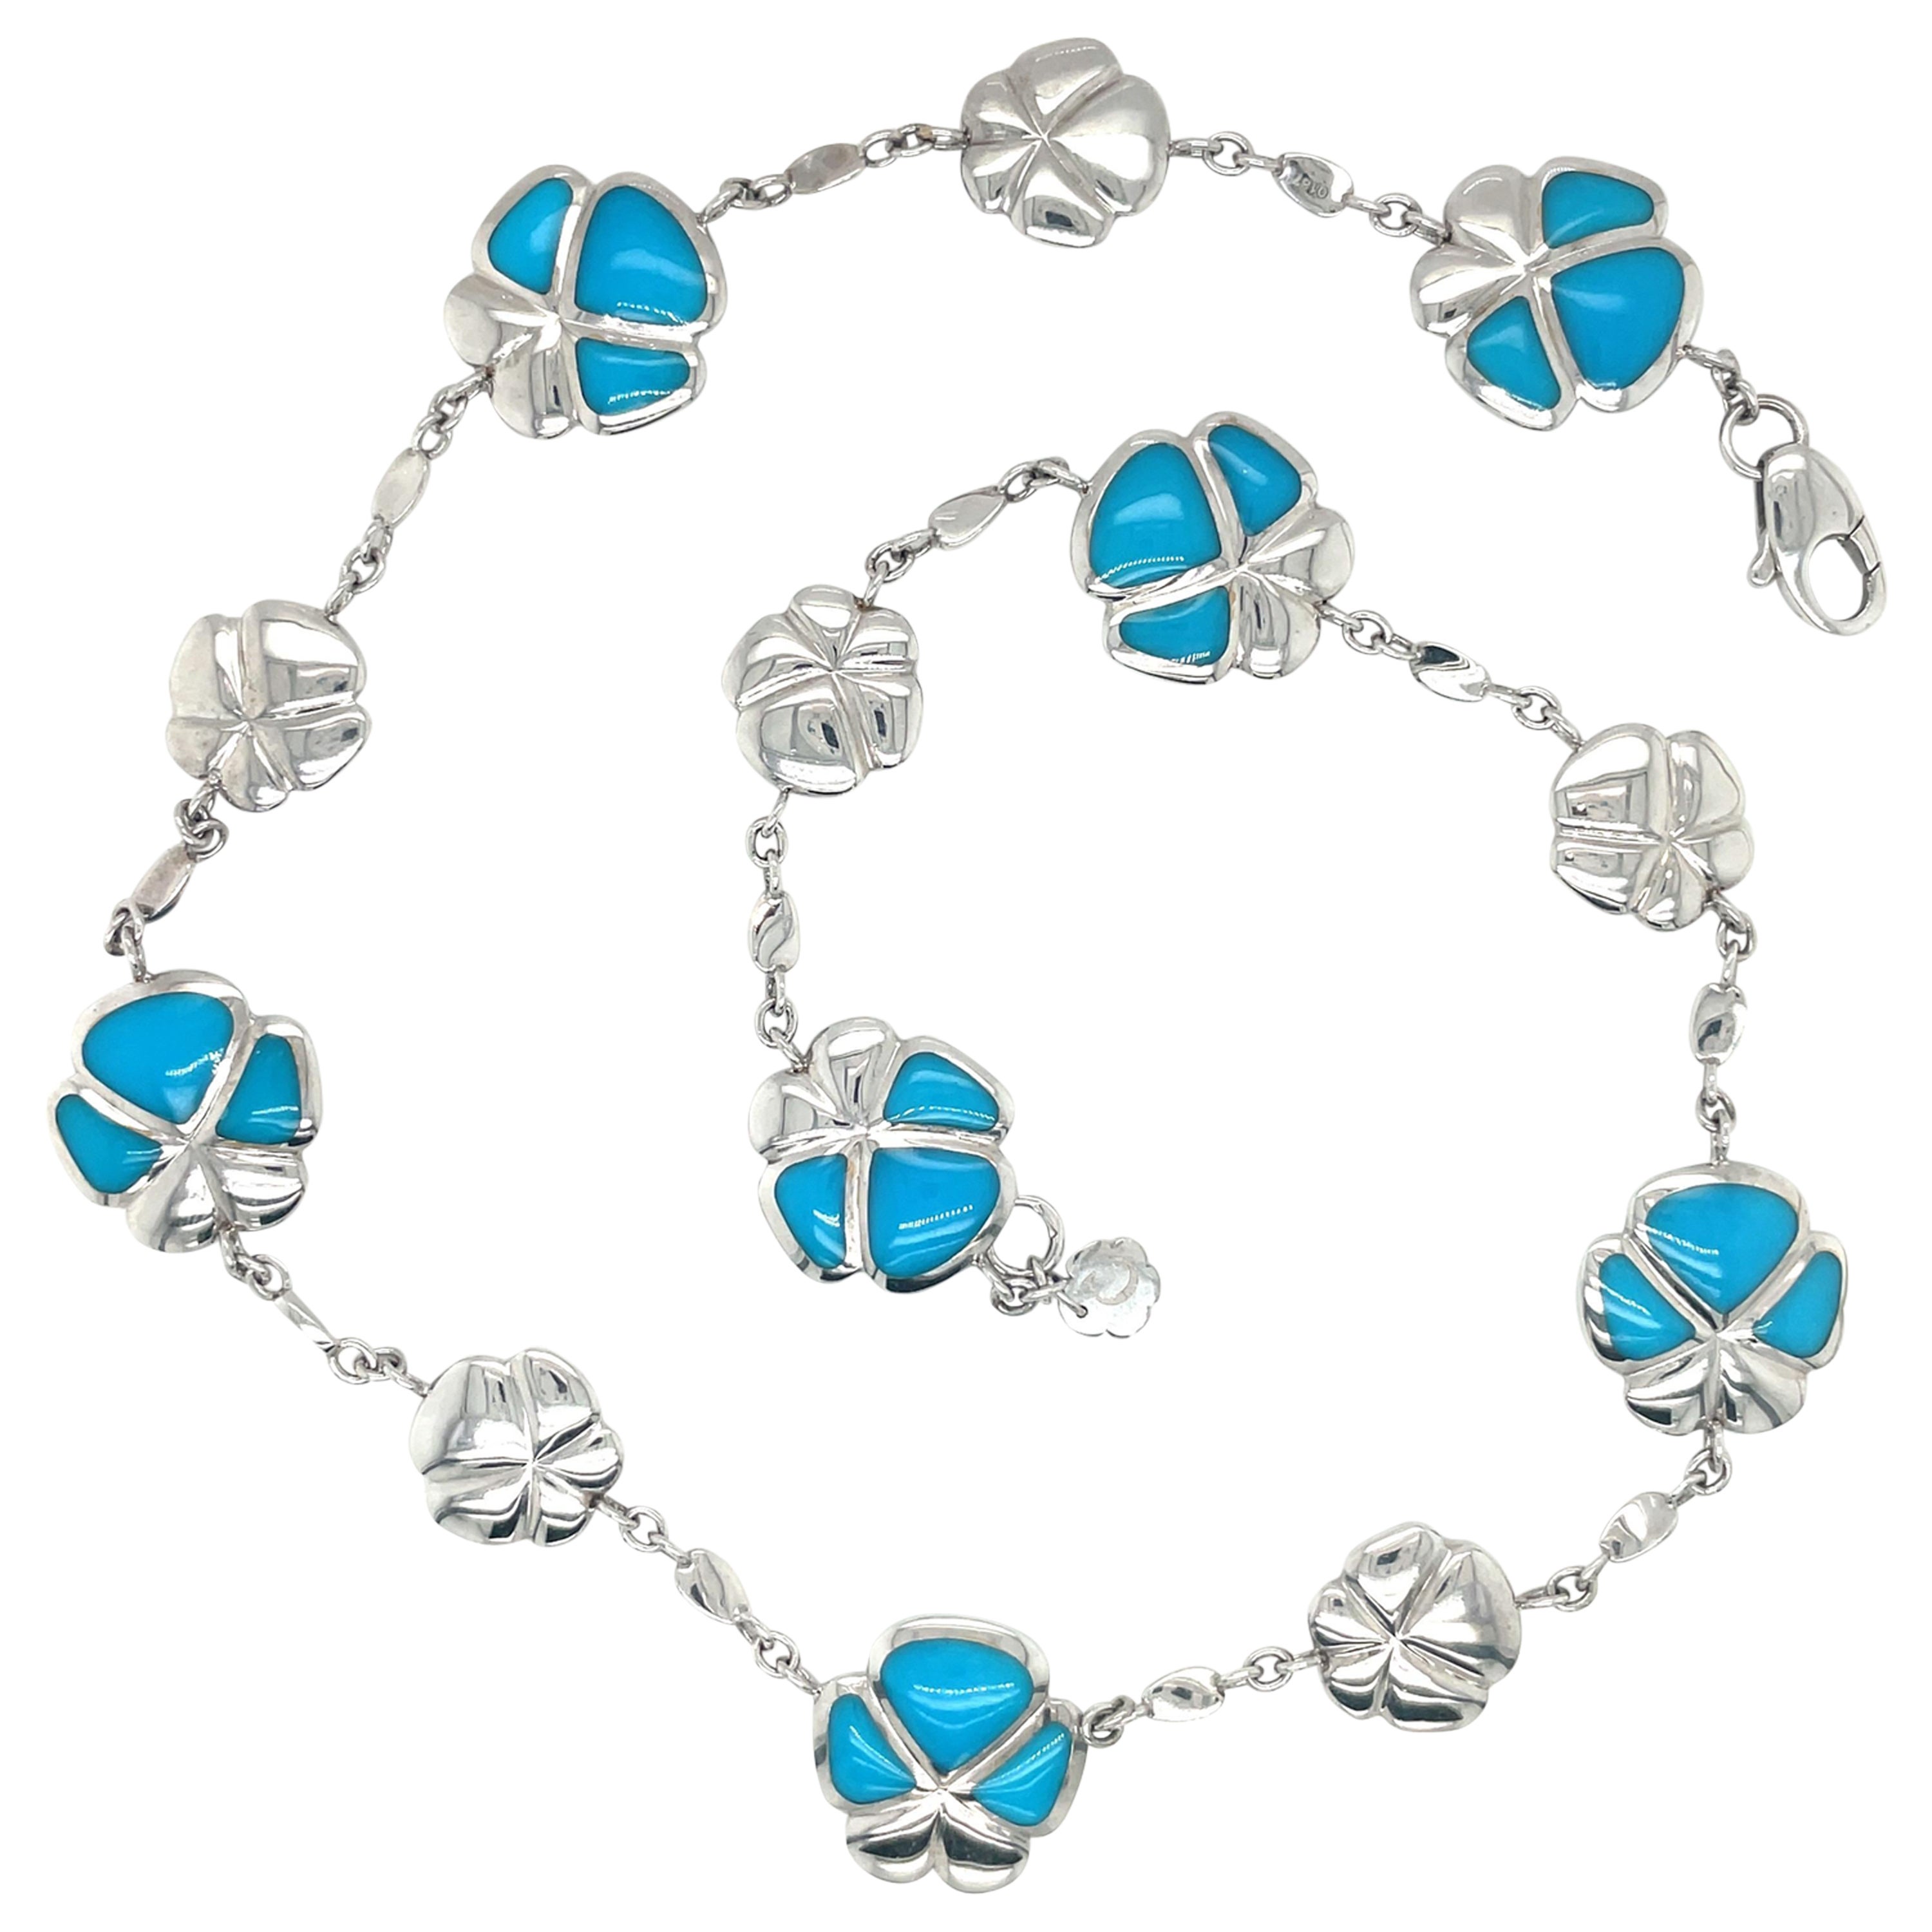 Amnbrosi 18KT White Gold & Turquoise Viola Flower Necklace For Sale